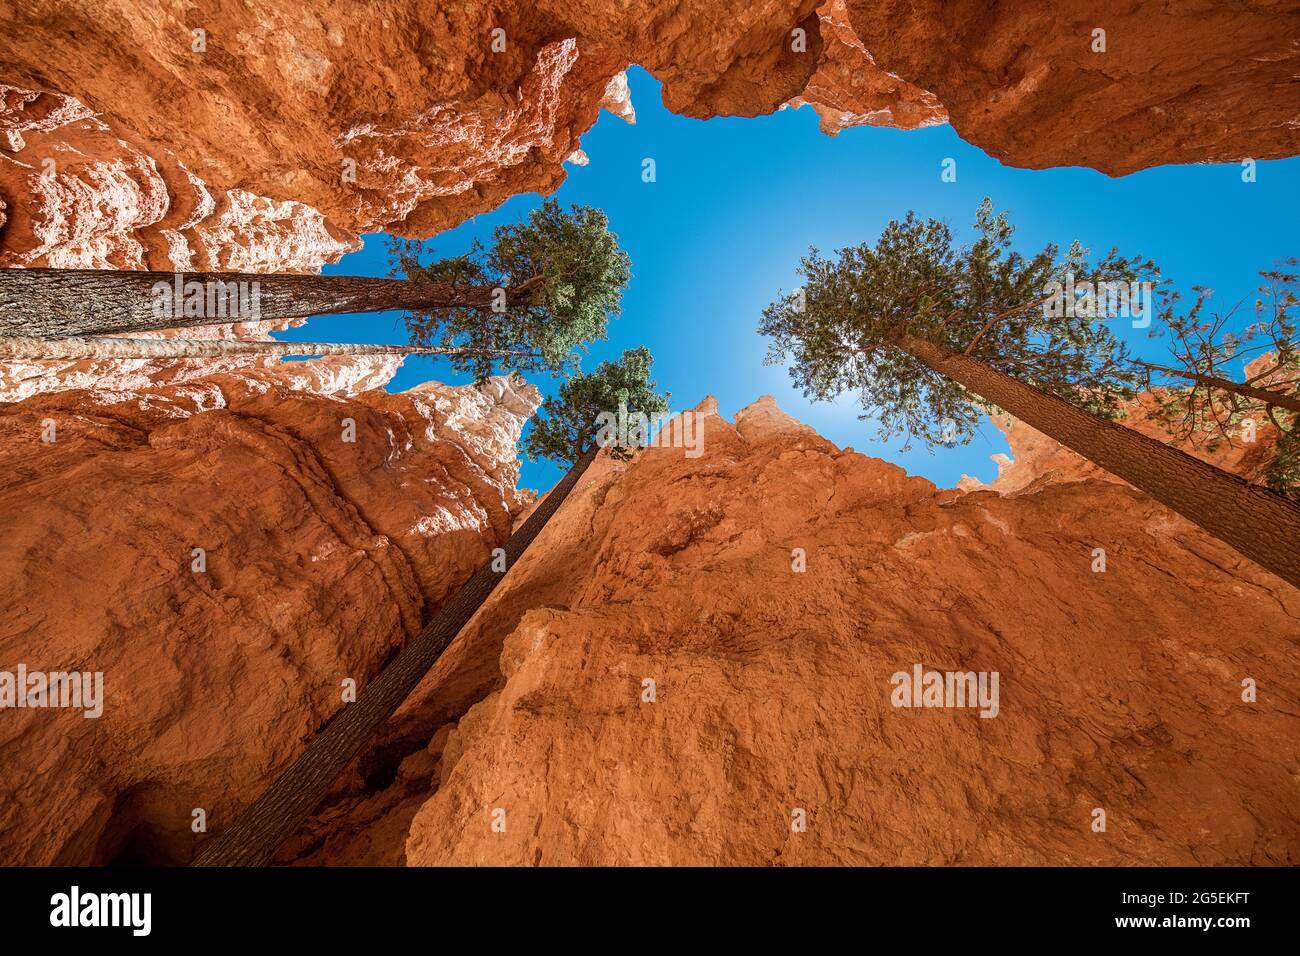 Bryce Canyon, looking up from the bottom of the canyon with the trees surging up to the blue sky Stock Photo